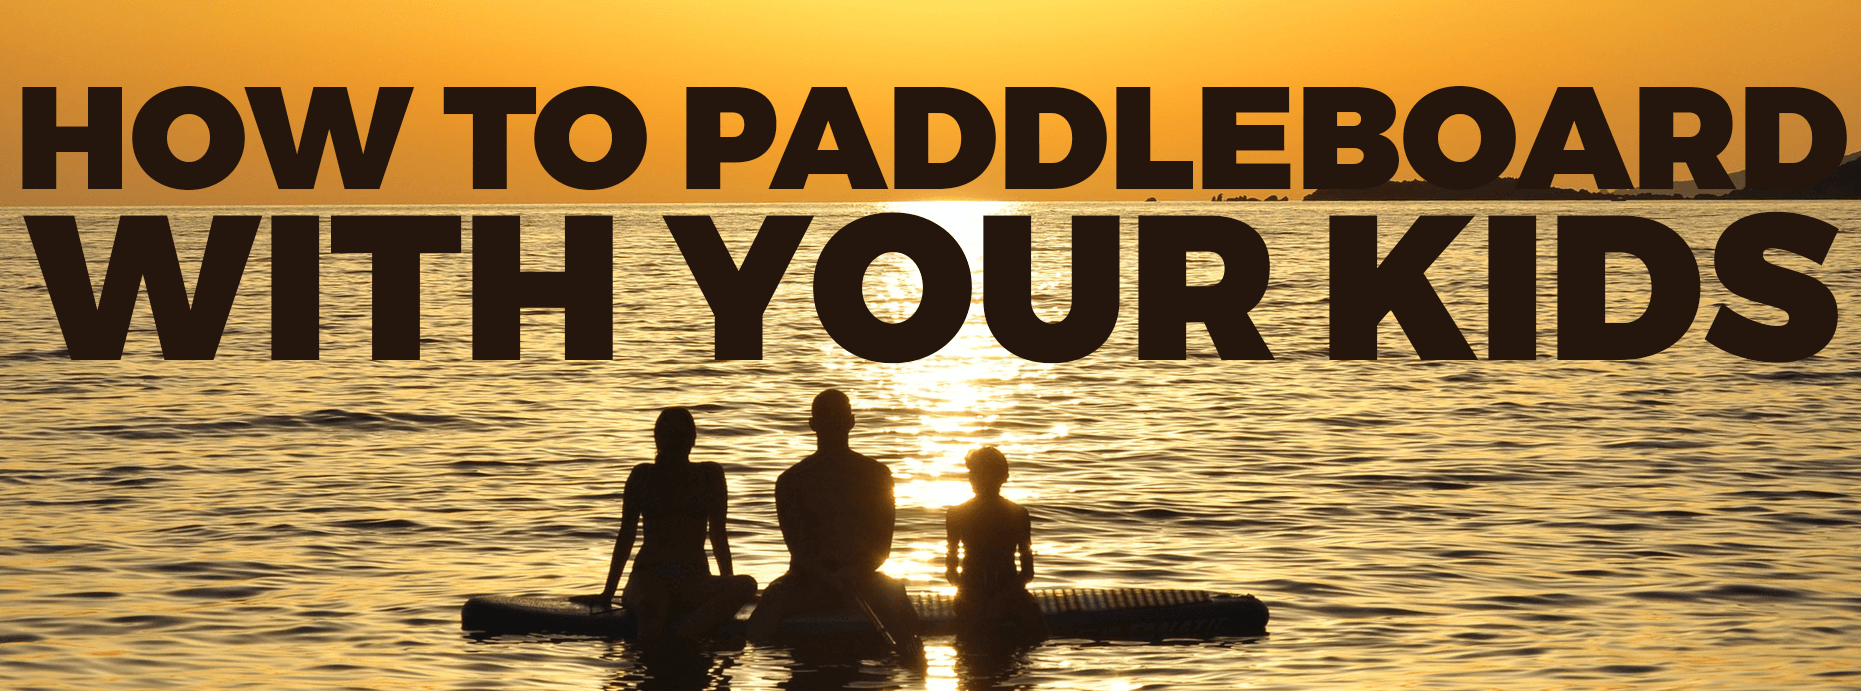 How to Paddleboard with Your Kids